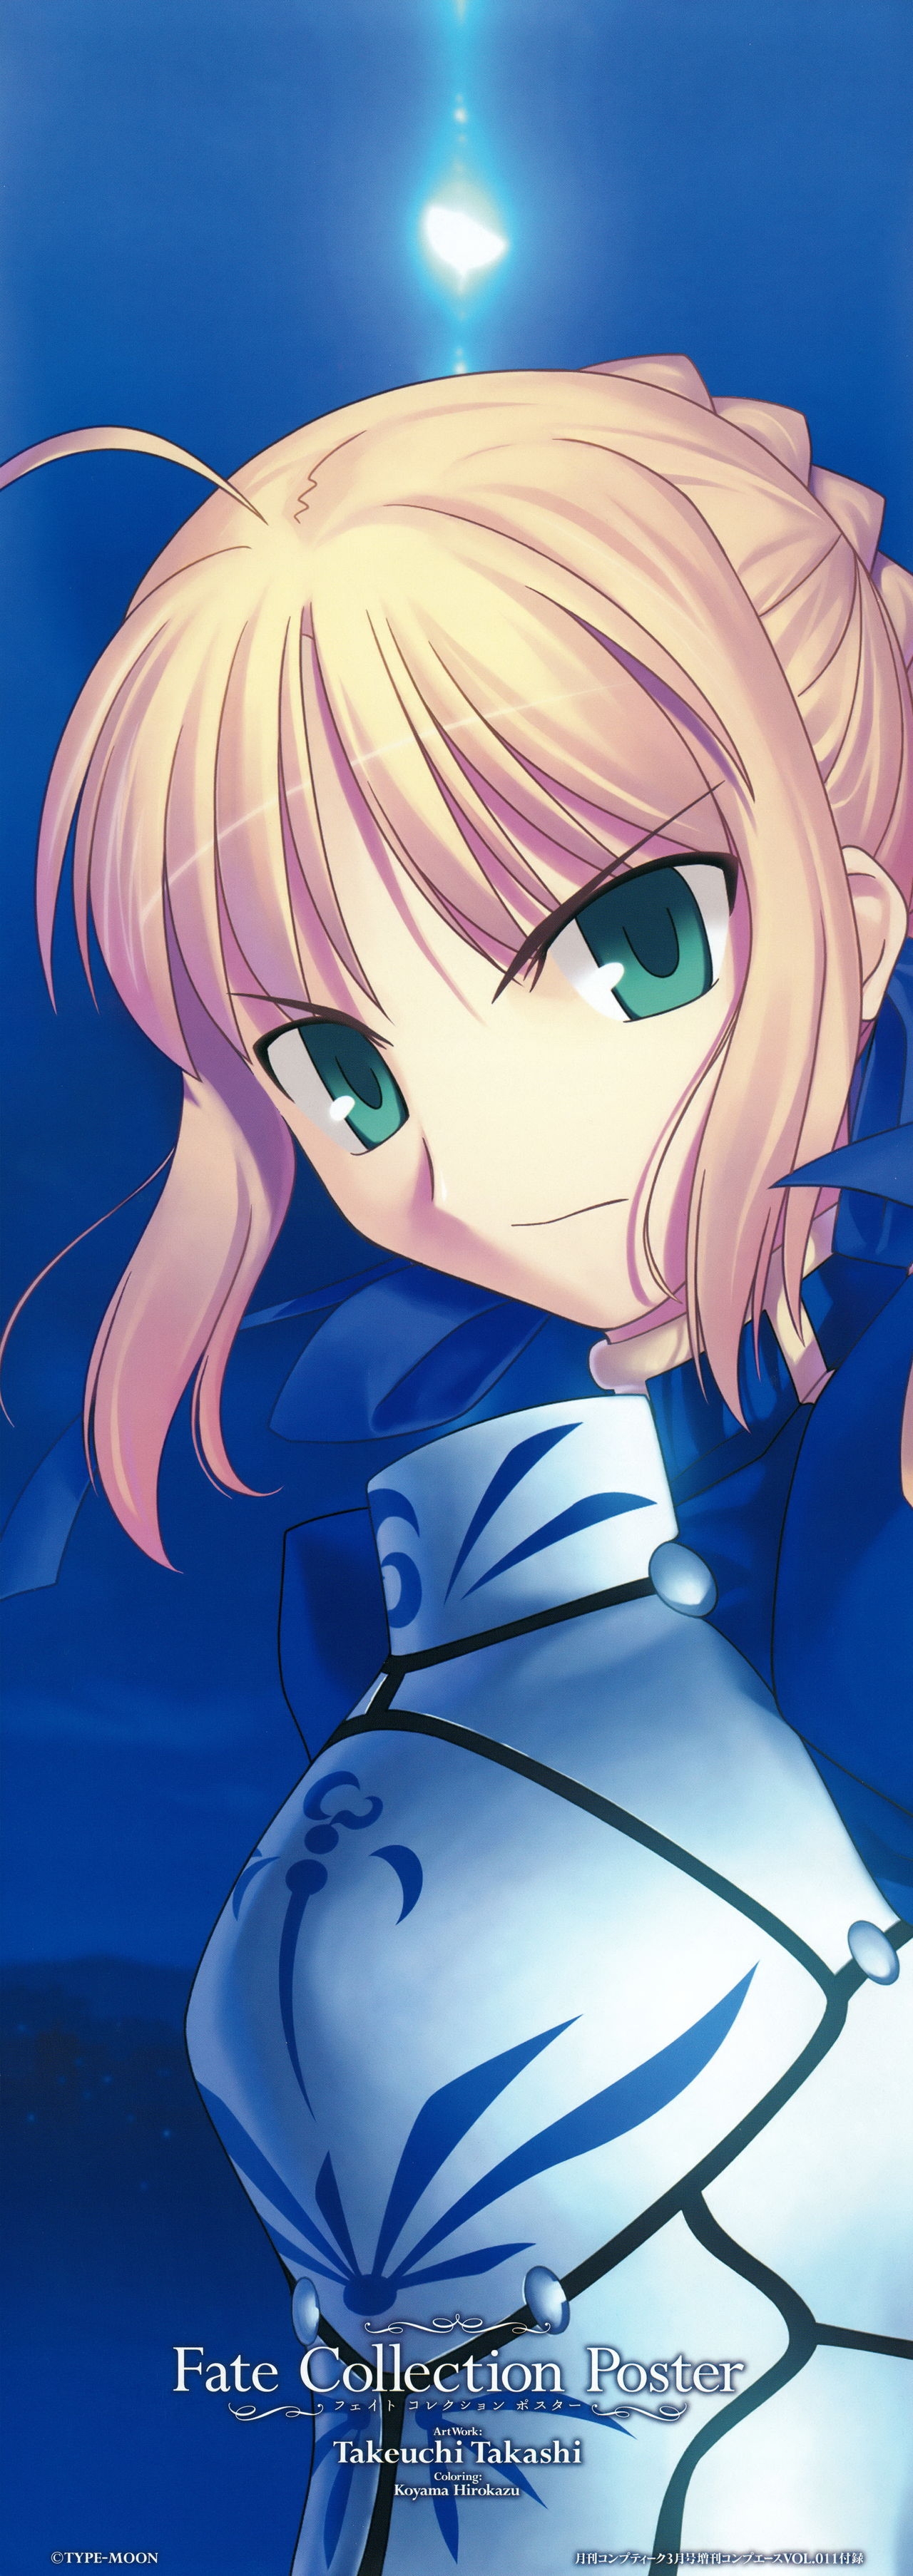 Fate Collection Poster 2